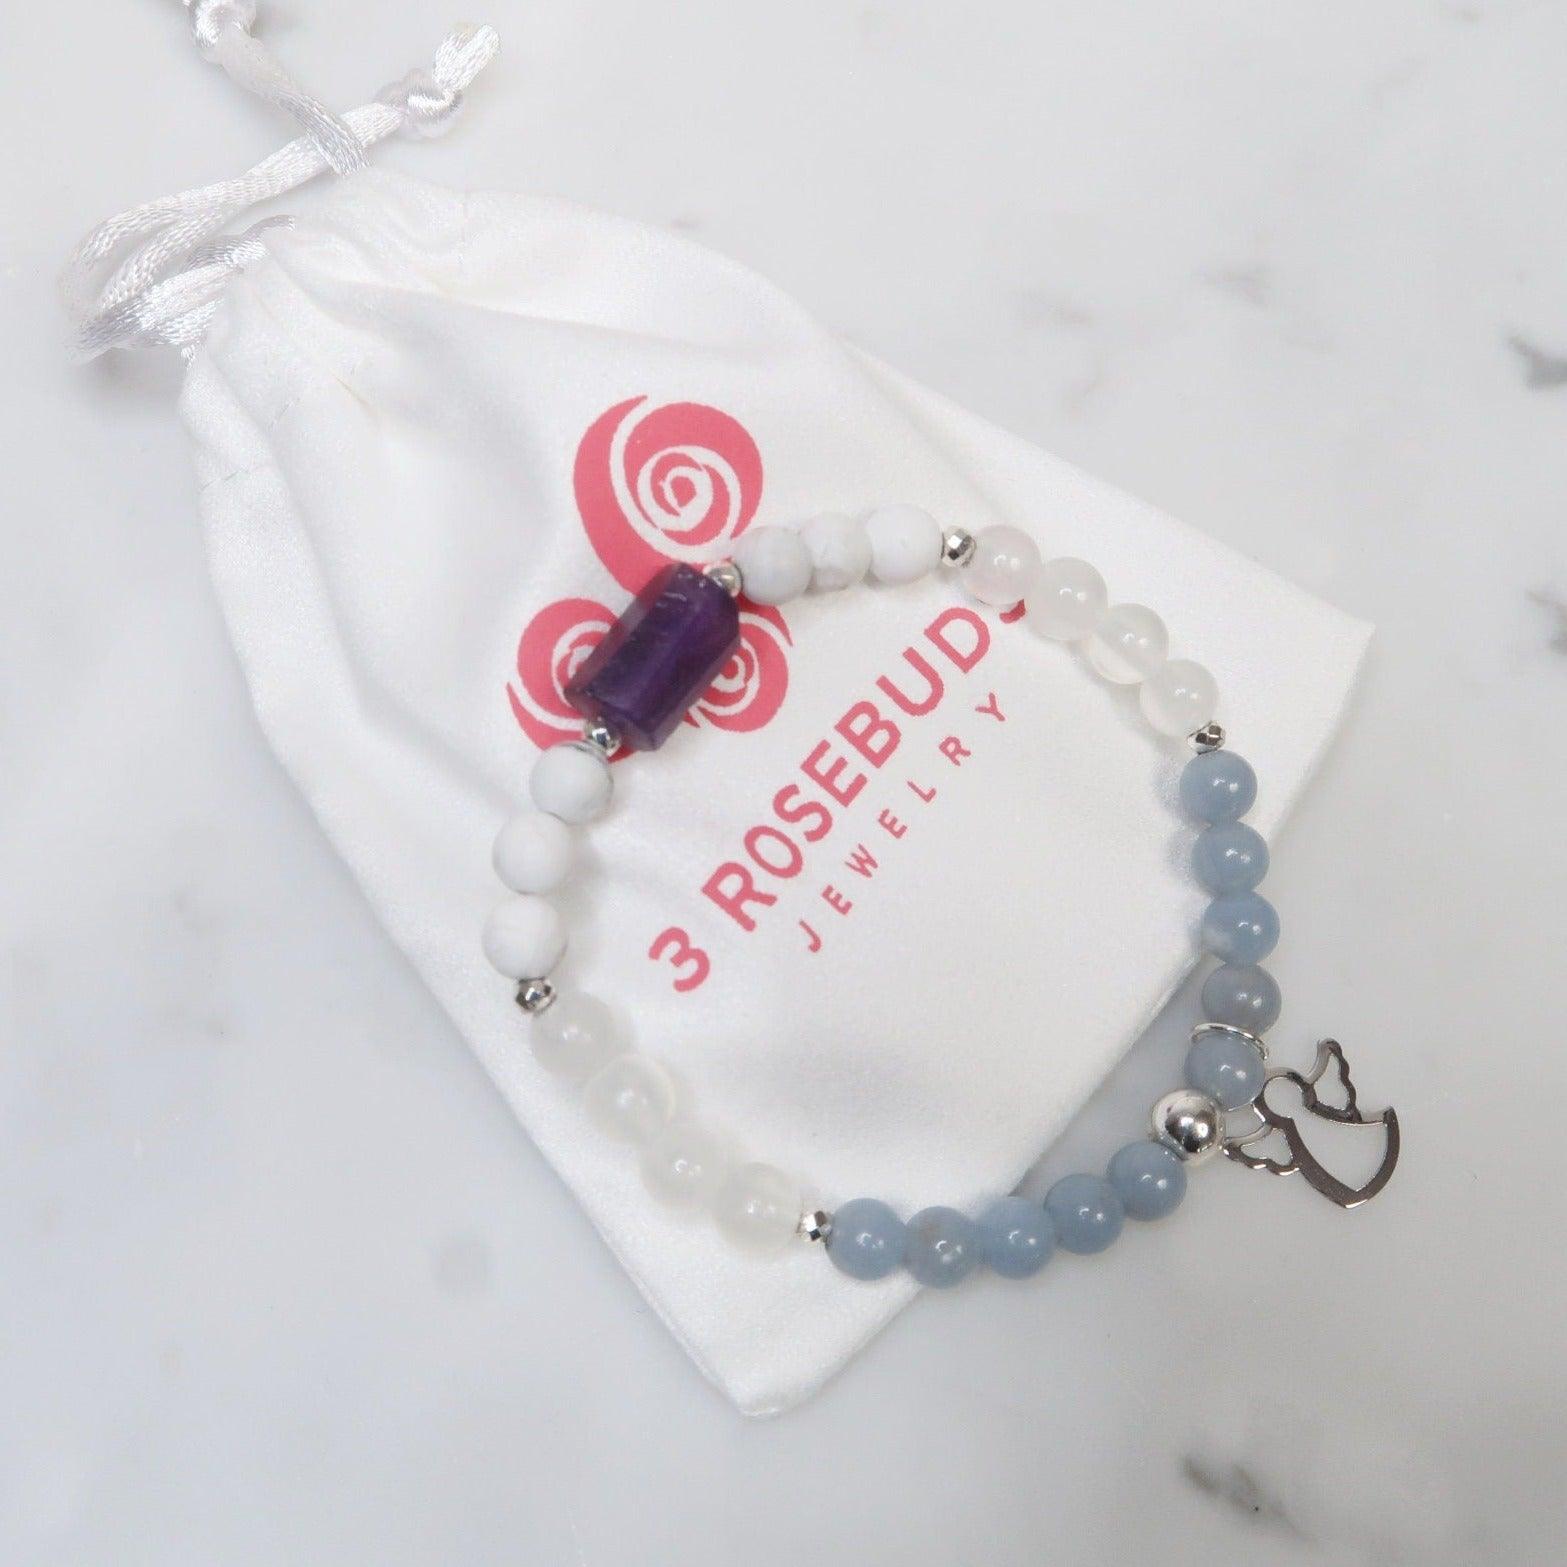 Reiki Infused Healing Gemstone Bracelet to Help you Connect with Your Angels & Guides. Featuring Amethyst, Angelite, Selenite, Howlite and an Angelic Charm to remind you that your team is always by your side. 